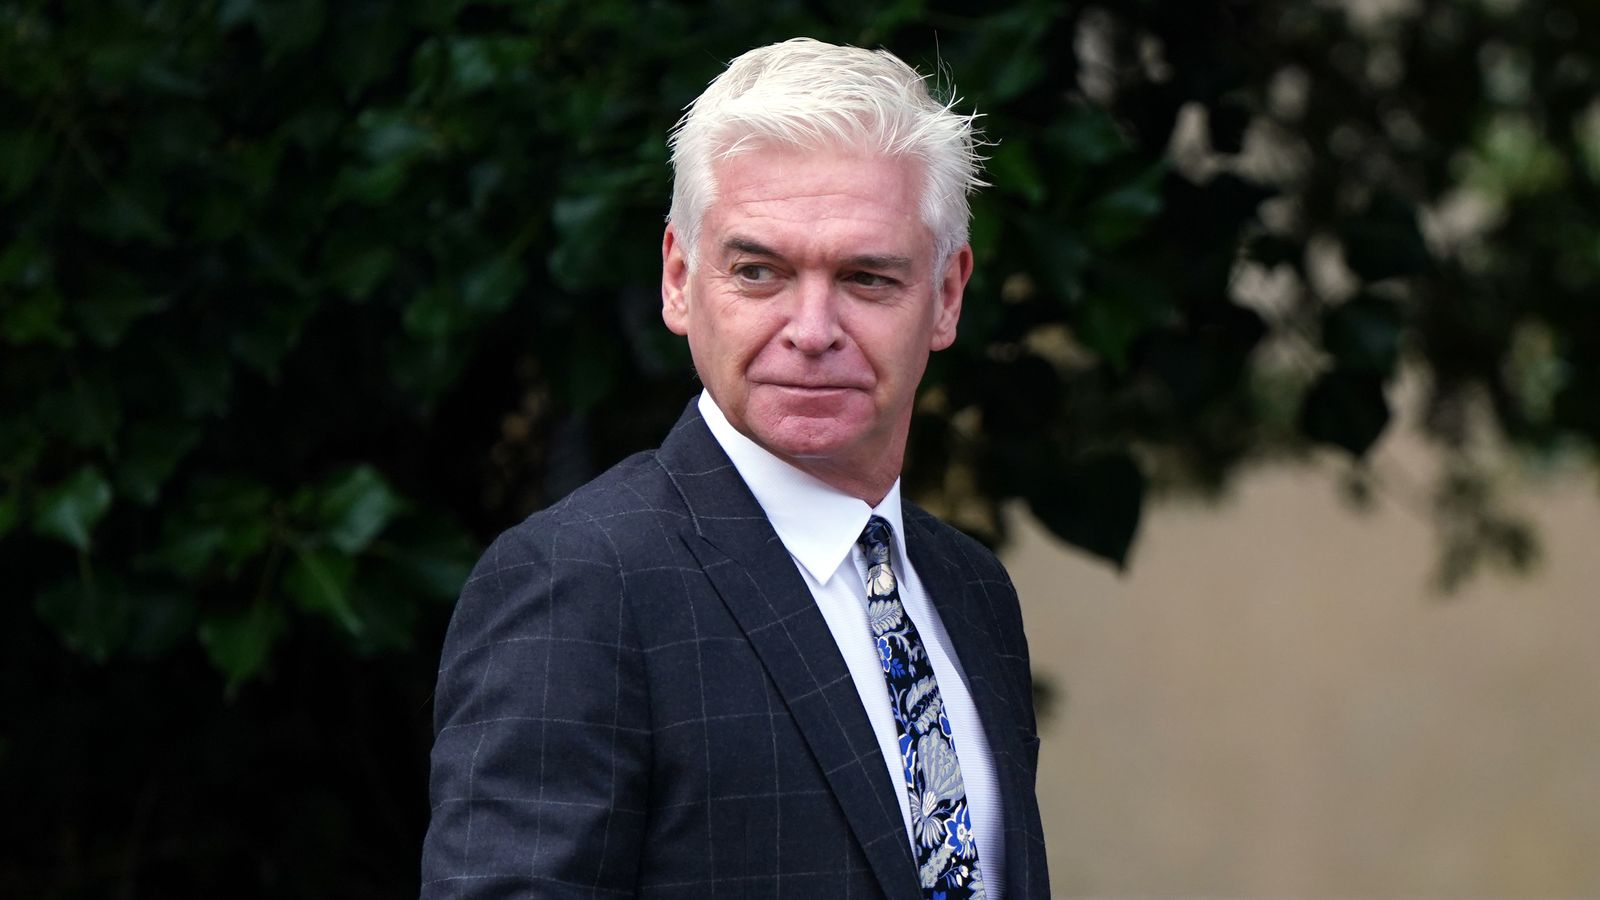 'Broken and ashamed' Phillip Schofield says he did not groom younger colleague